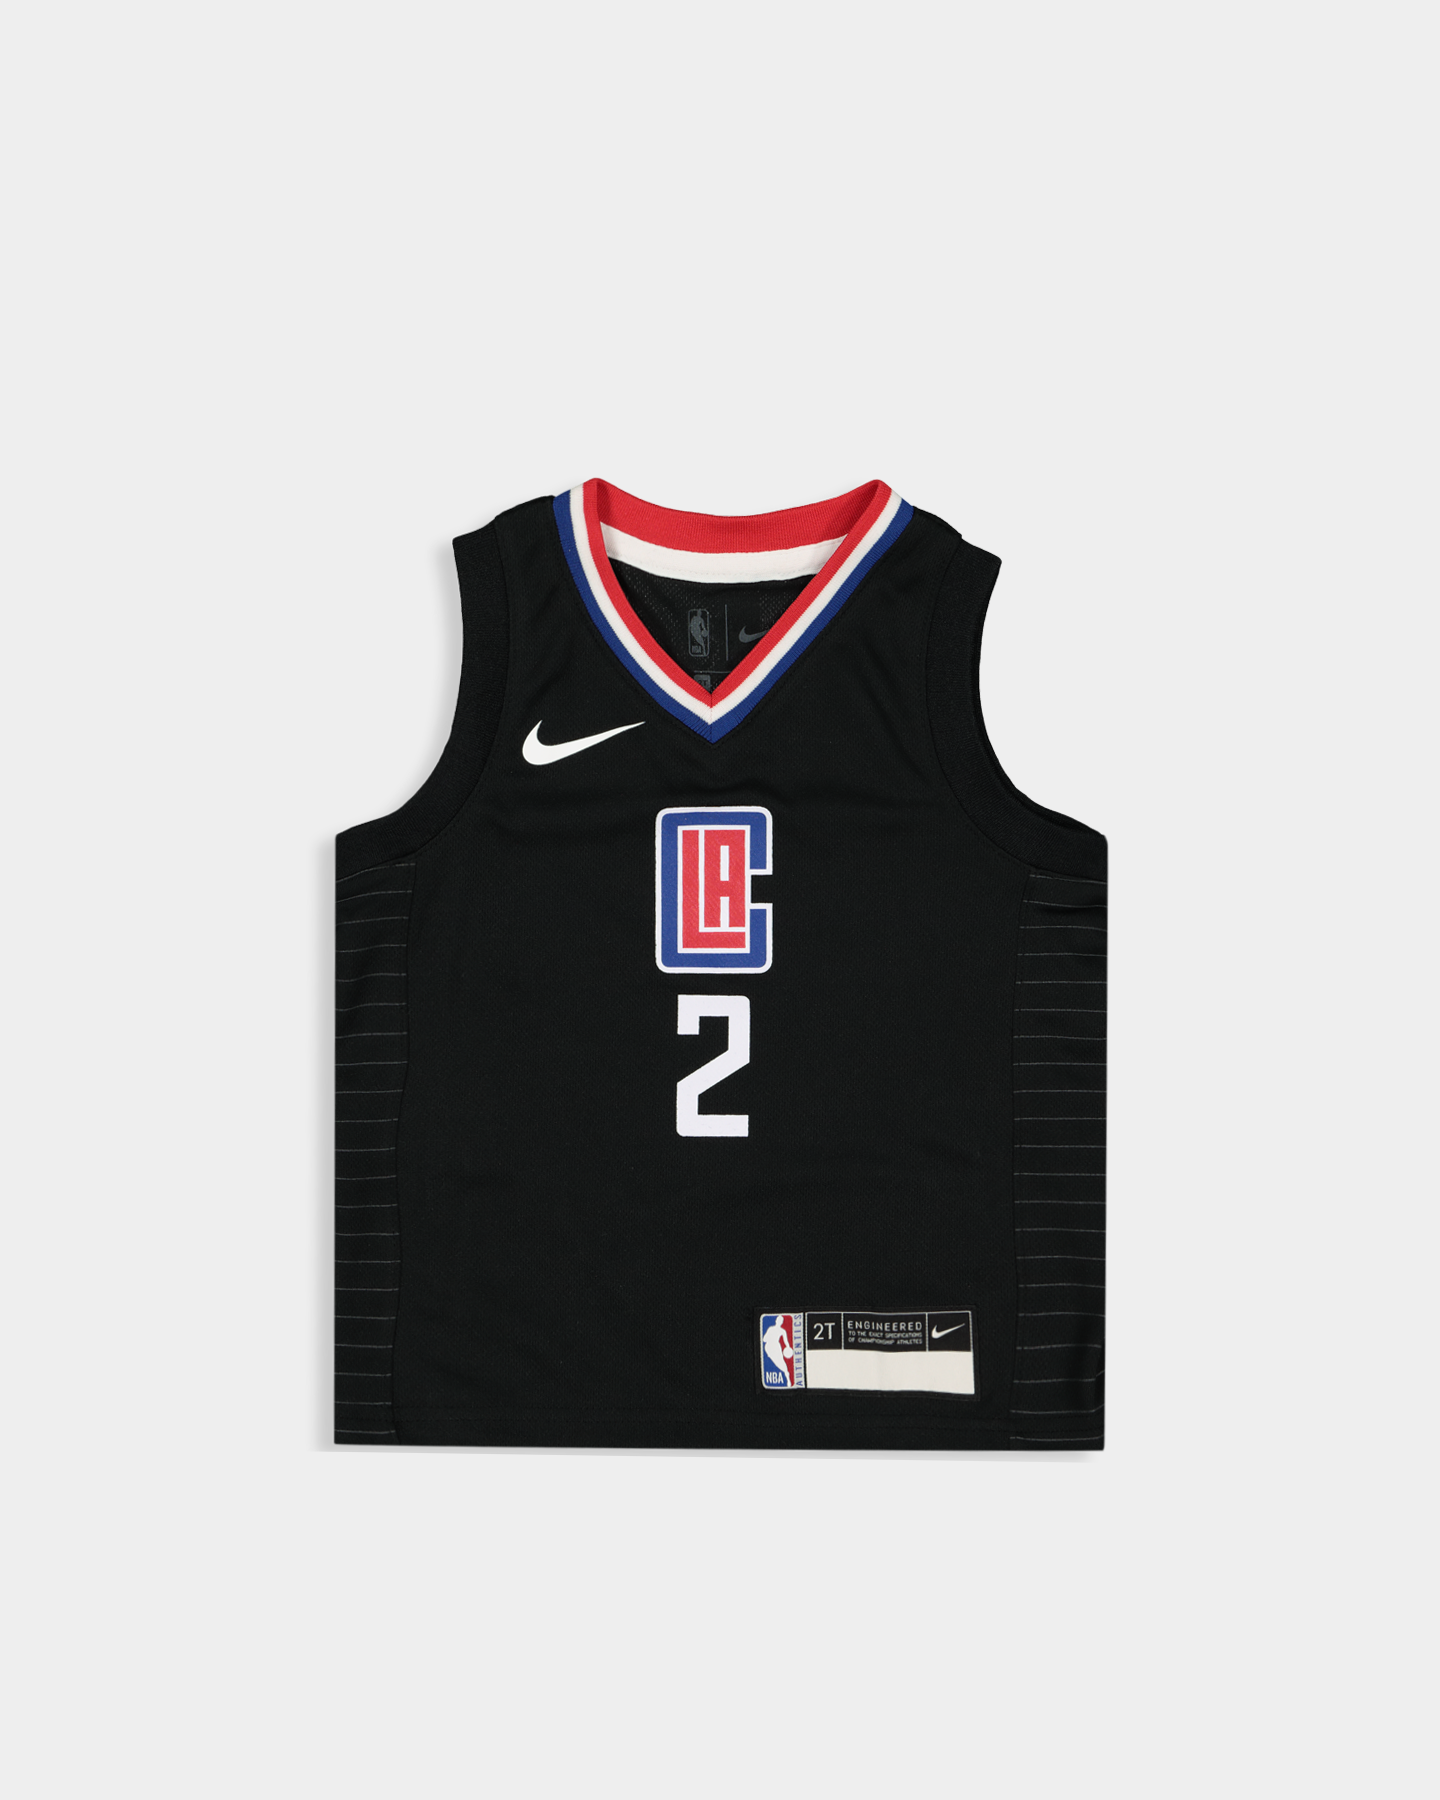 clippers nba jersey